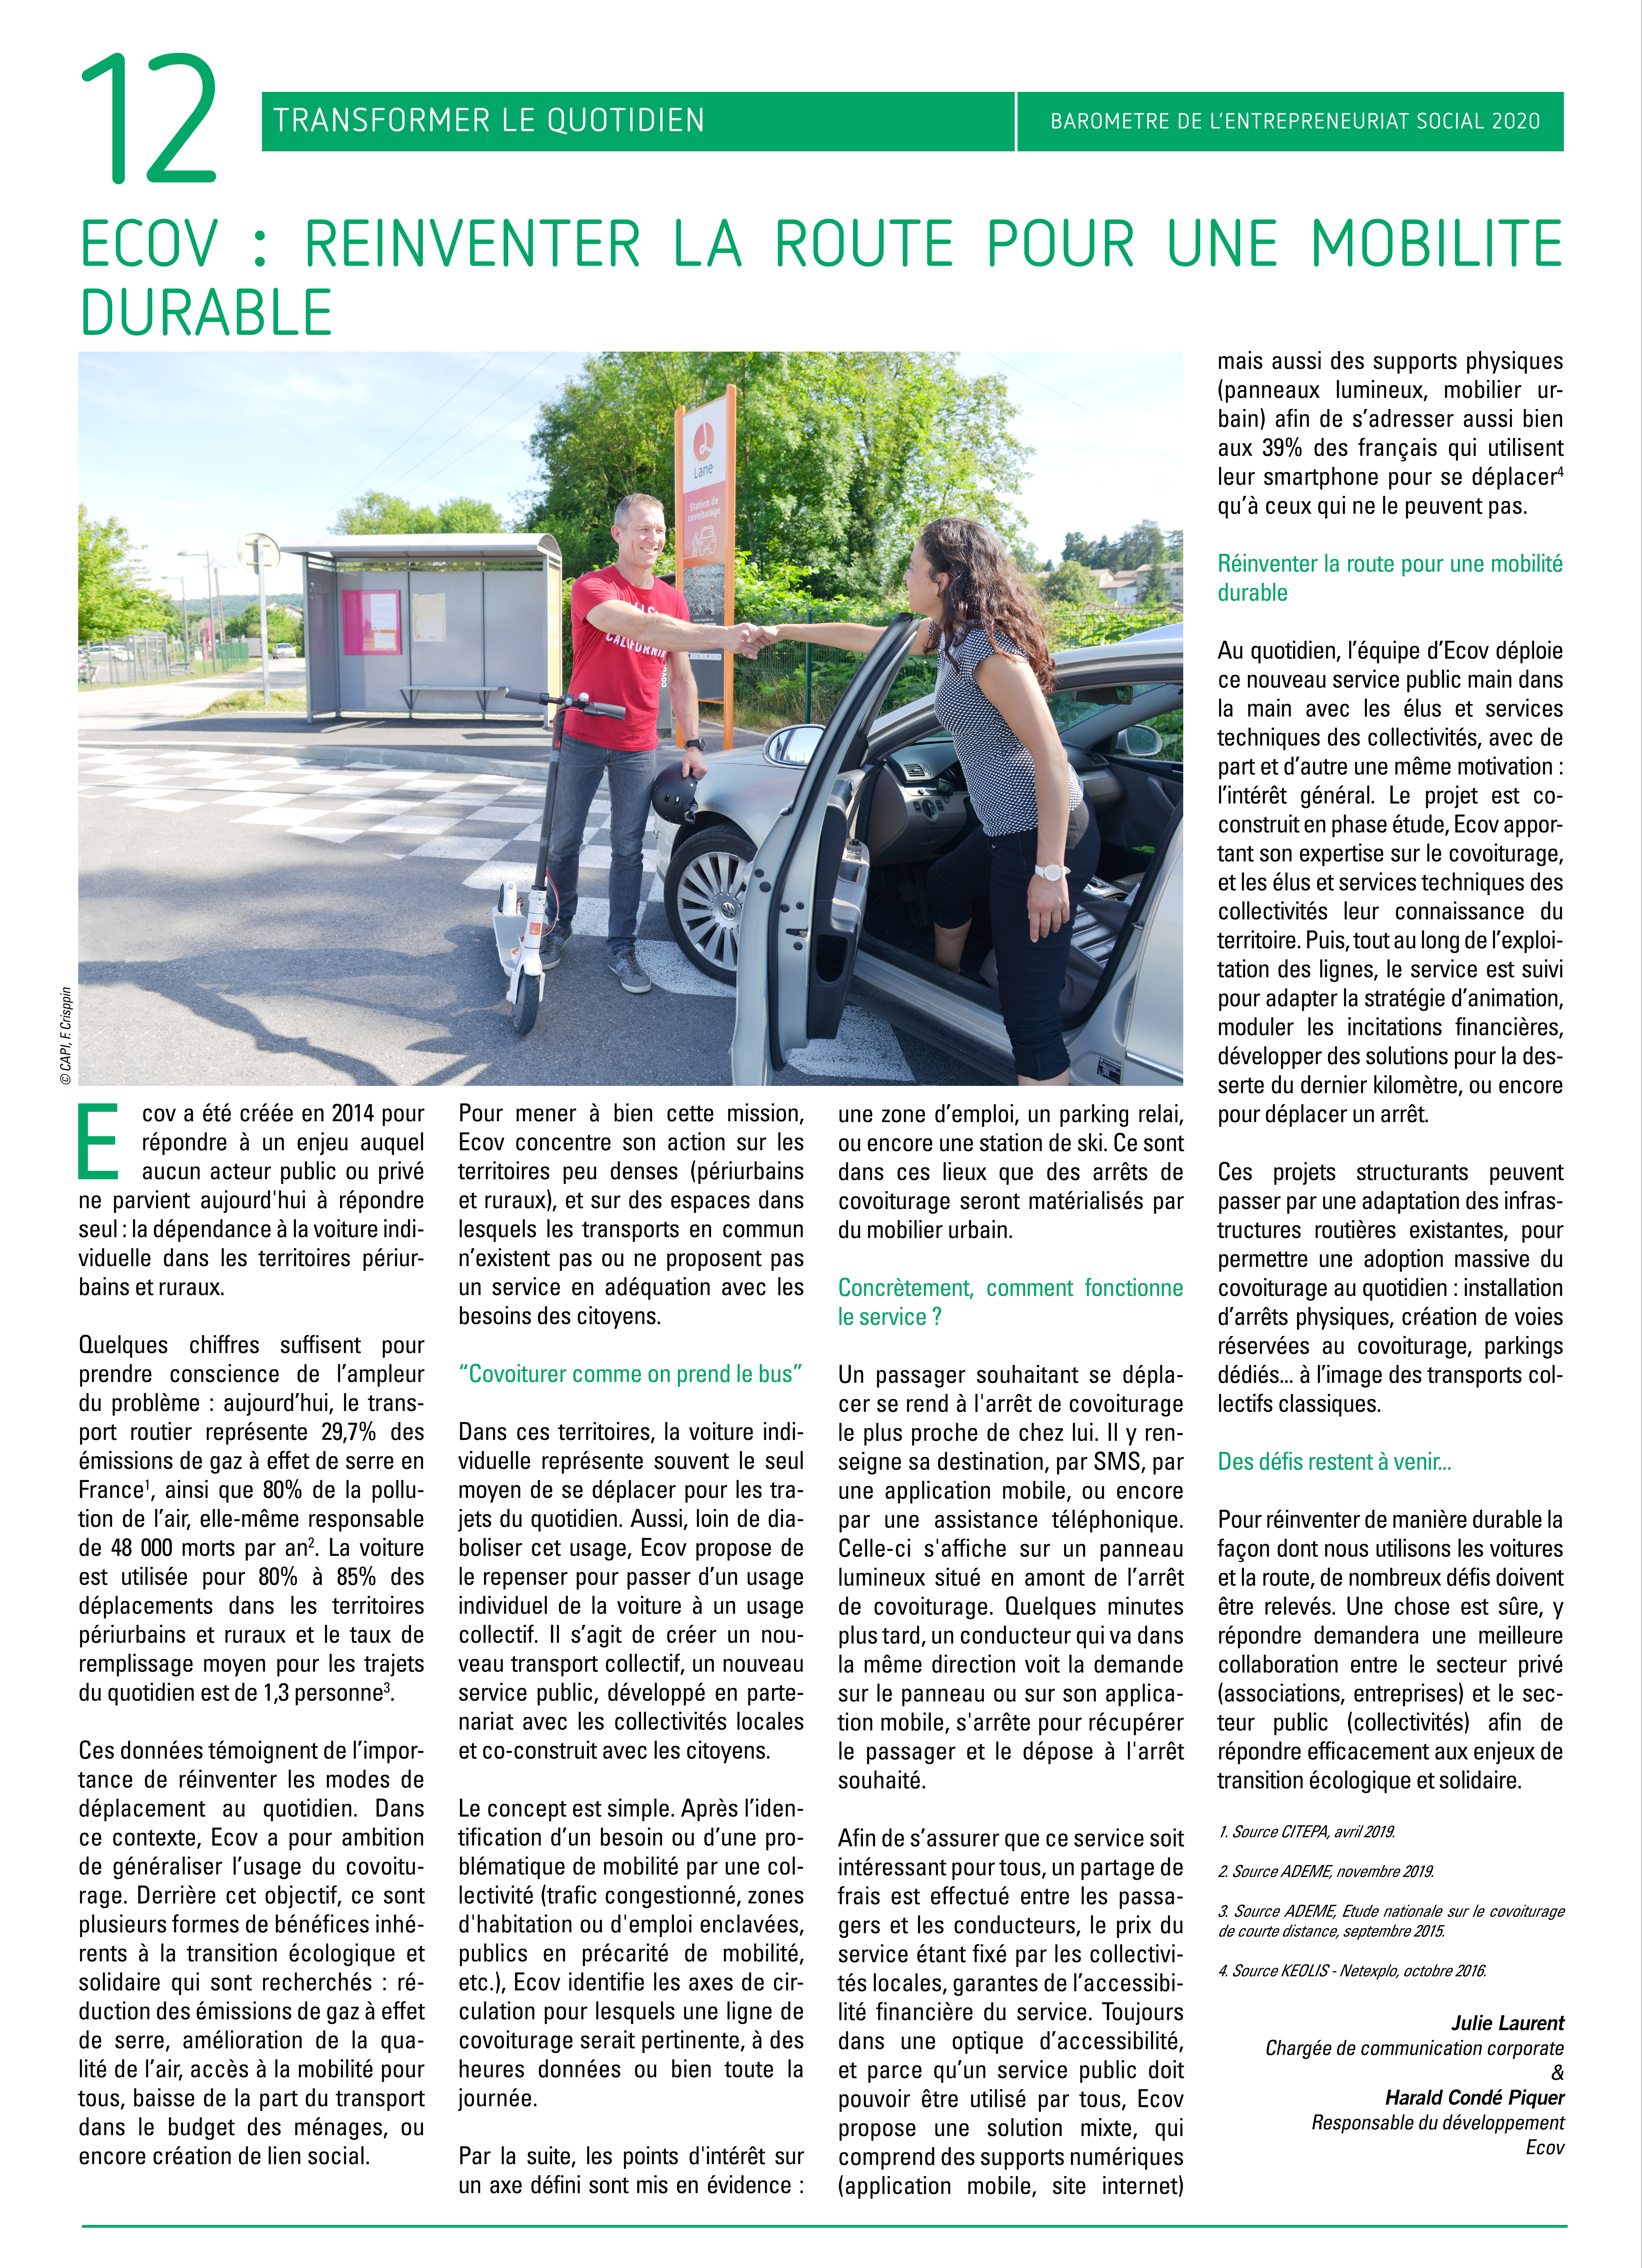 Ecov: Reinventing the way towards sustainable mobility